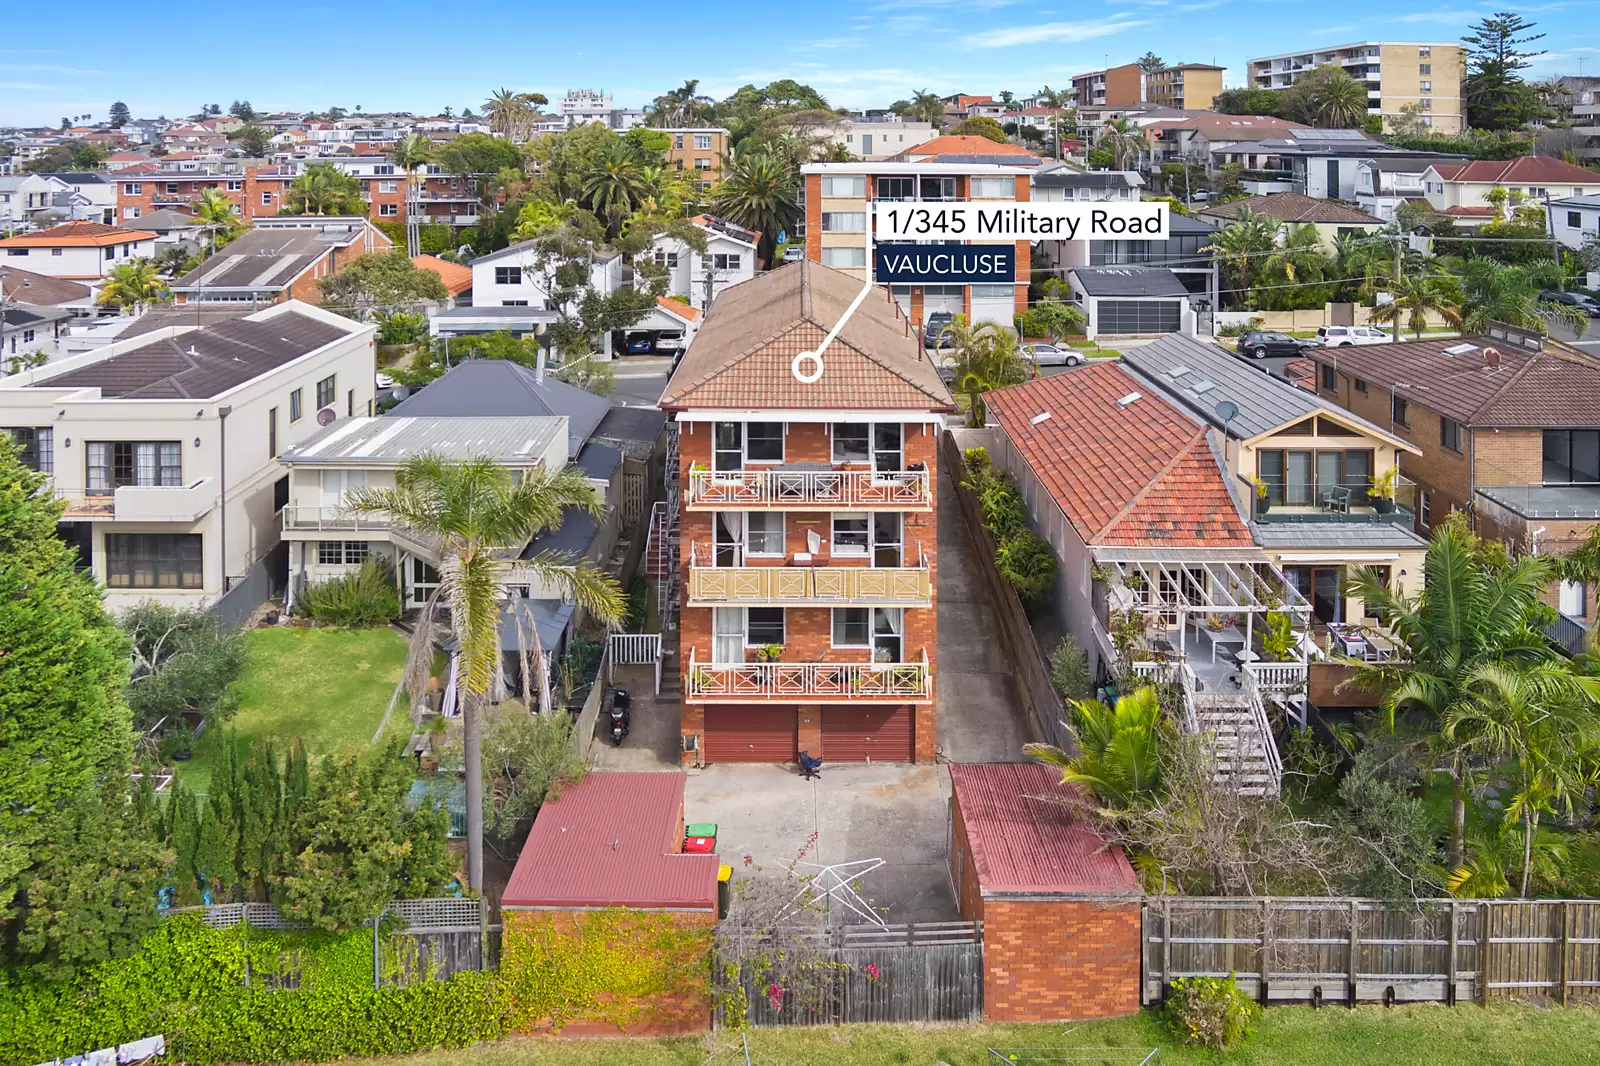 Photo #14: 1/345 Military Road, Vaucluse - Sold by Sydney Sotheby's International Realty